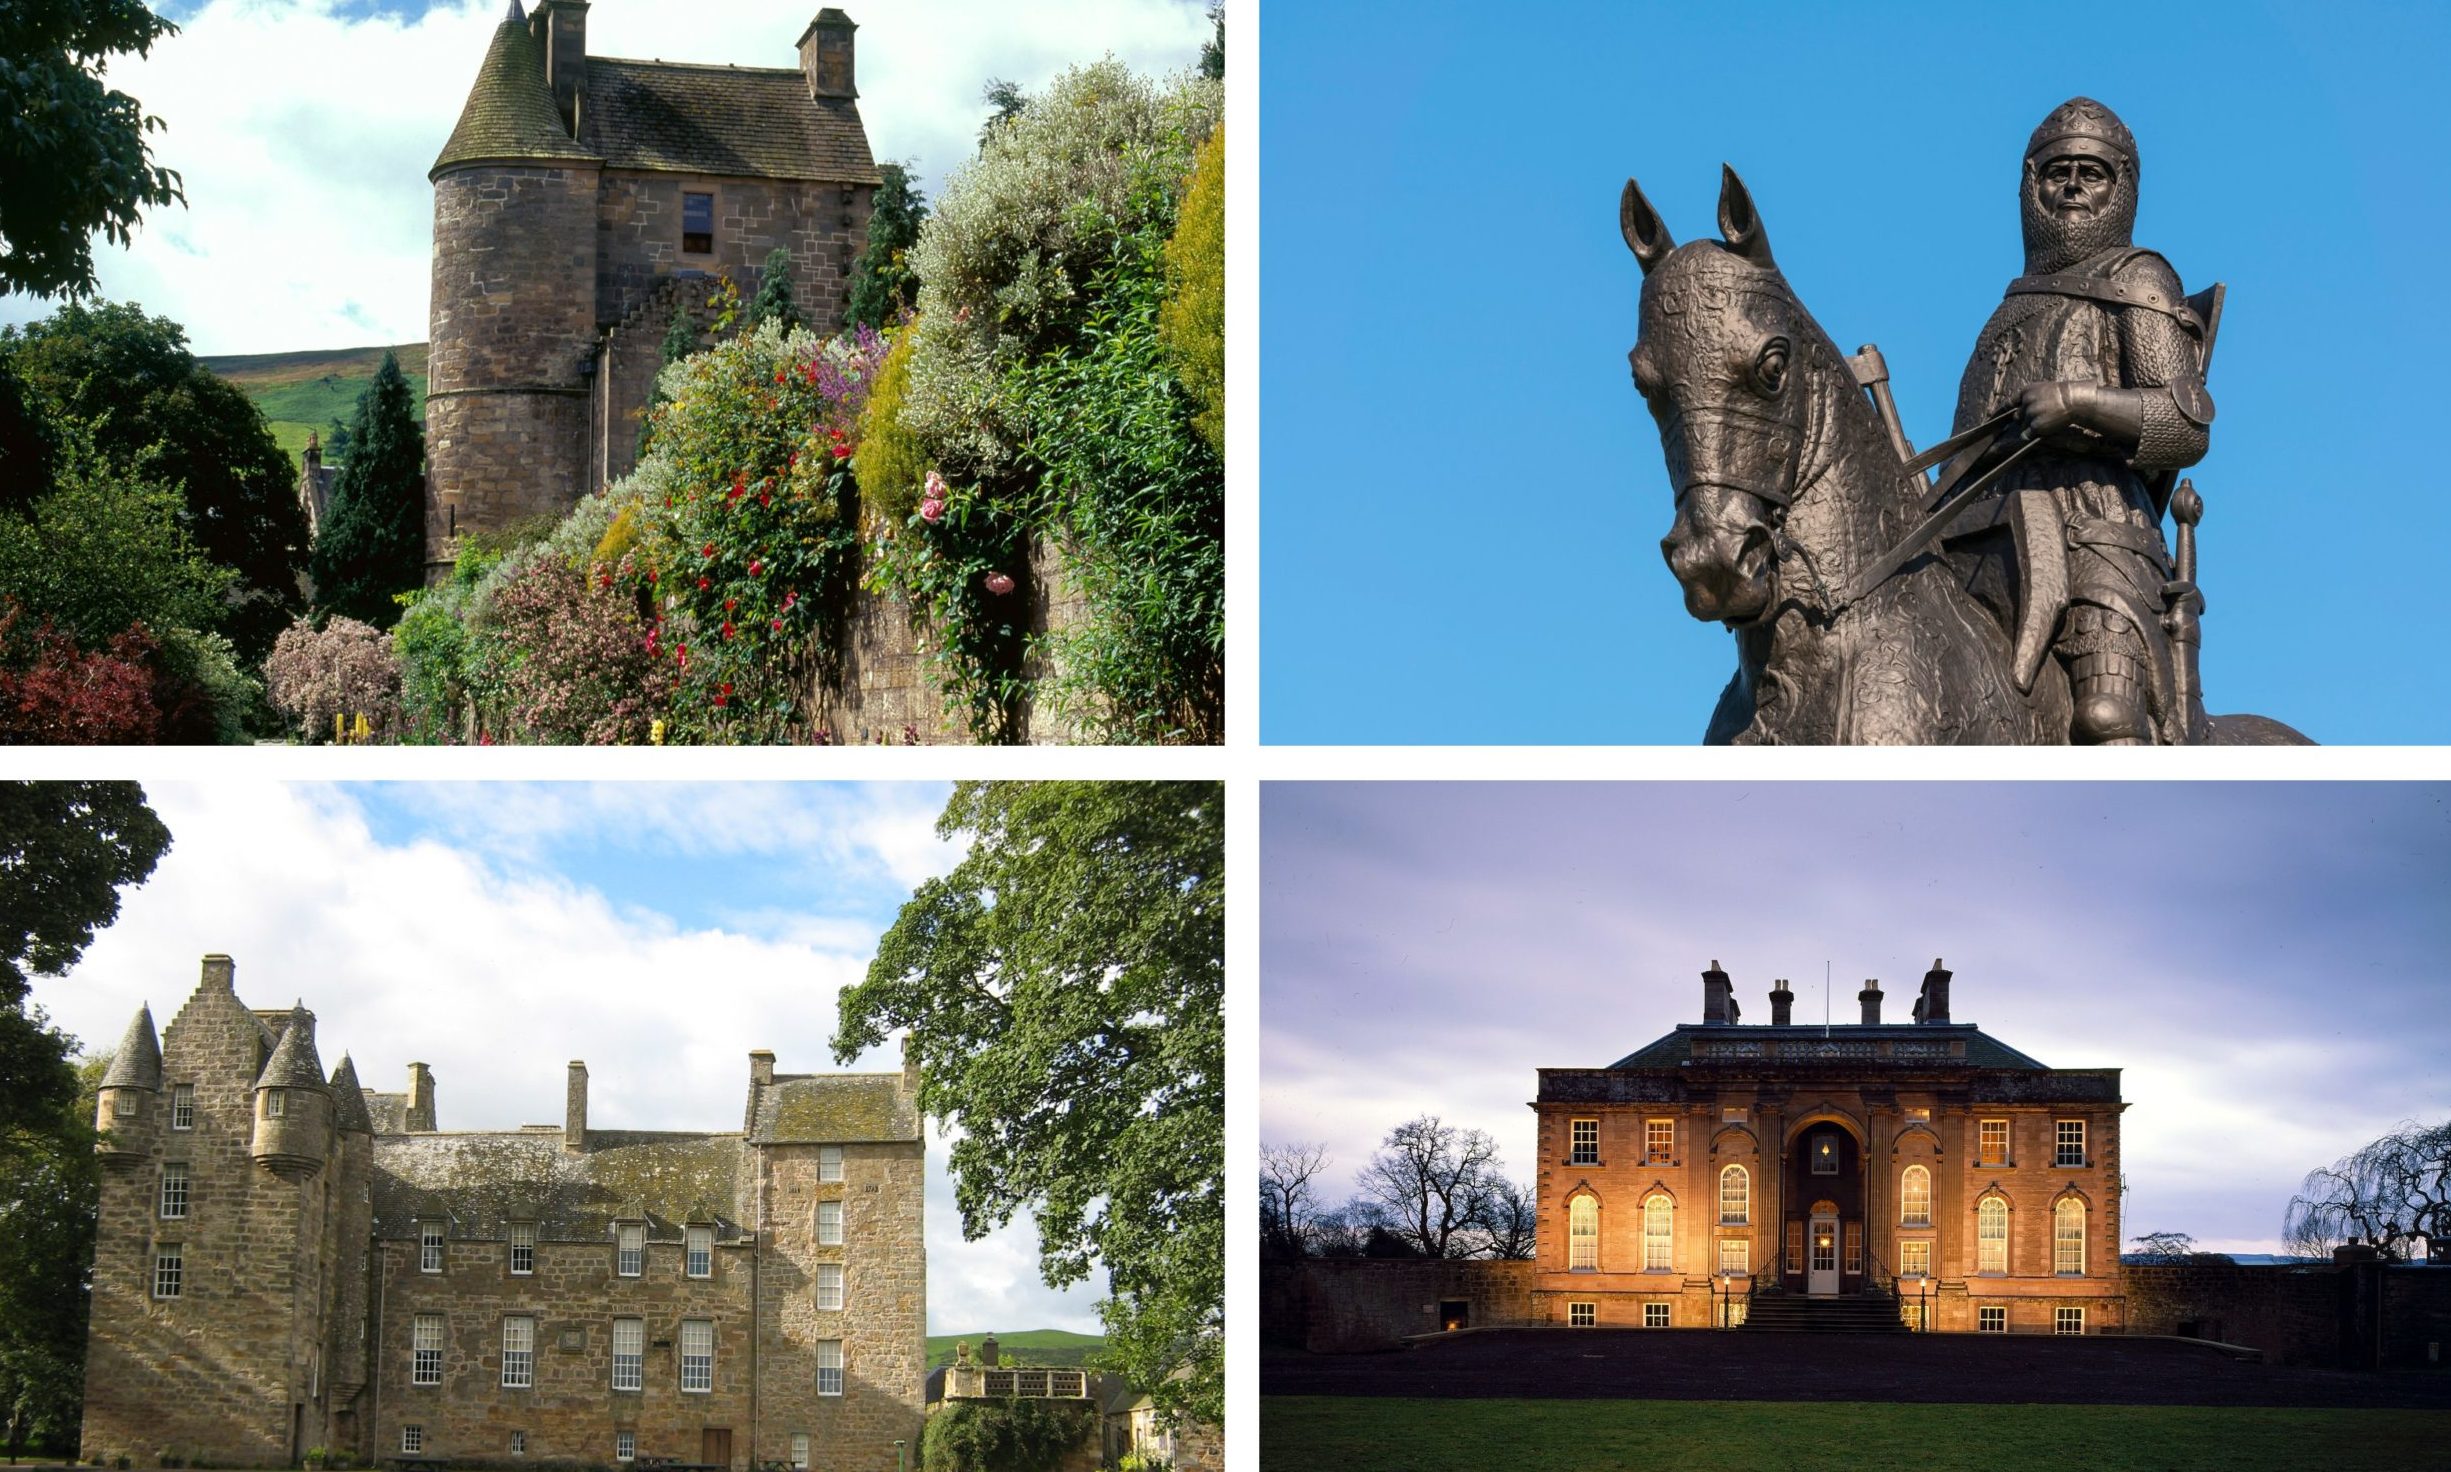 Falkland Palace, Bannockburn Visitor Centre, Kellie Castle and House of Dun are some of the properties the National Trust for Scotland (NTS) is hoping  to safeguard.